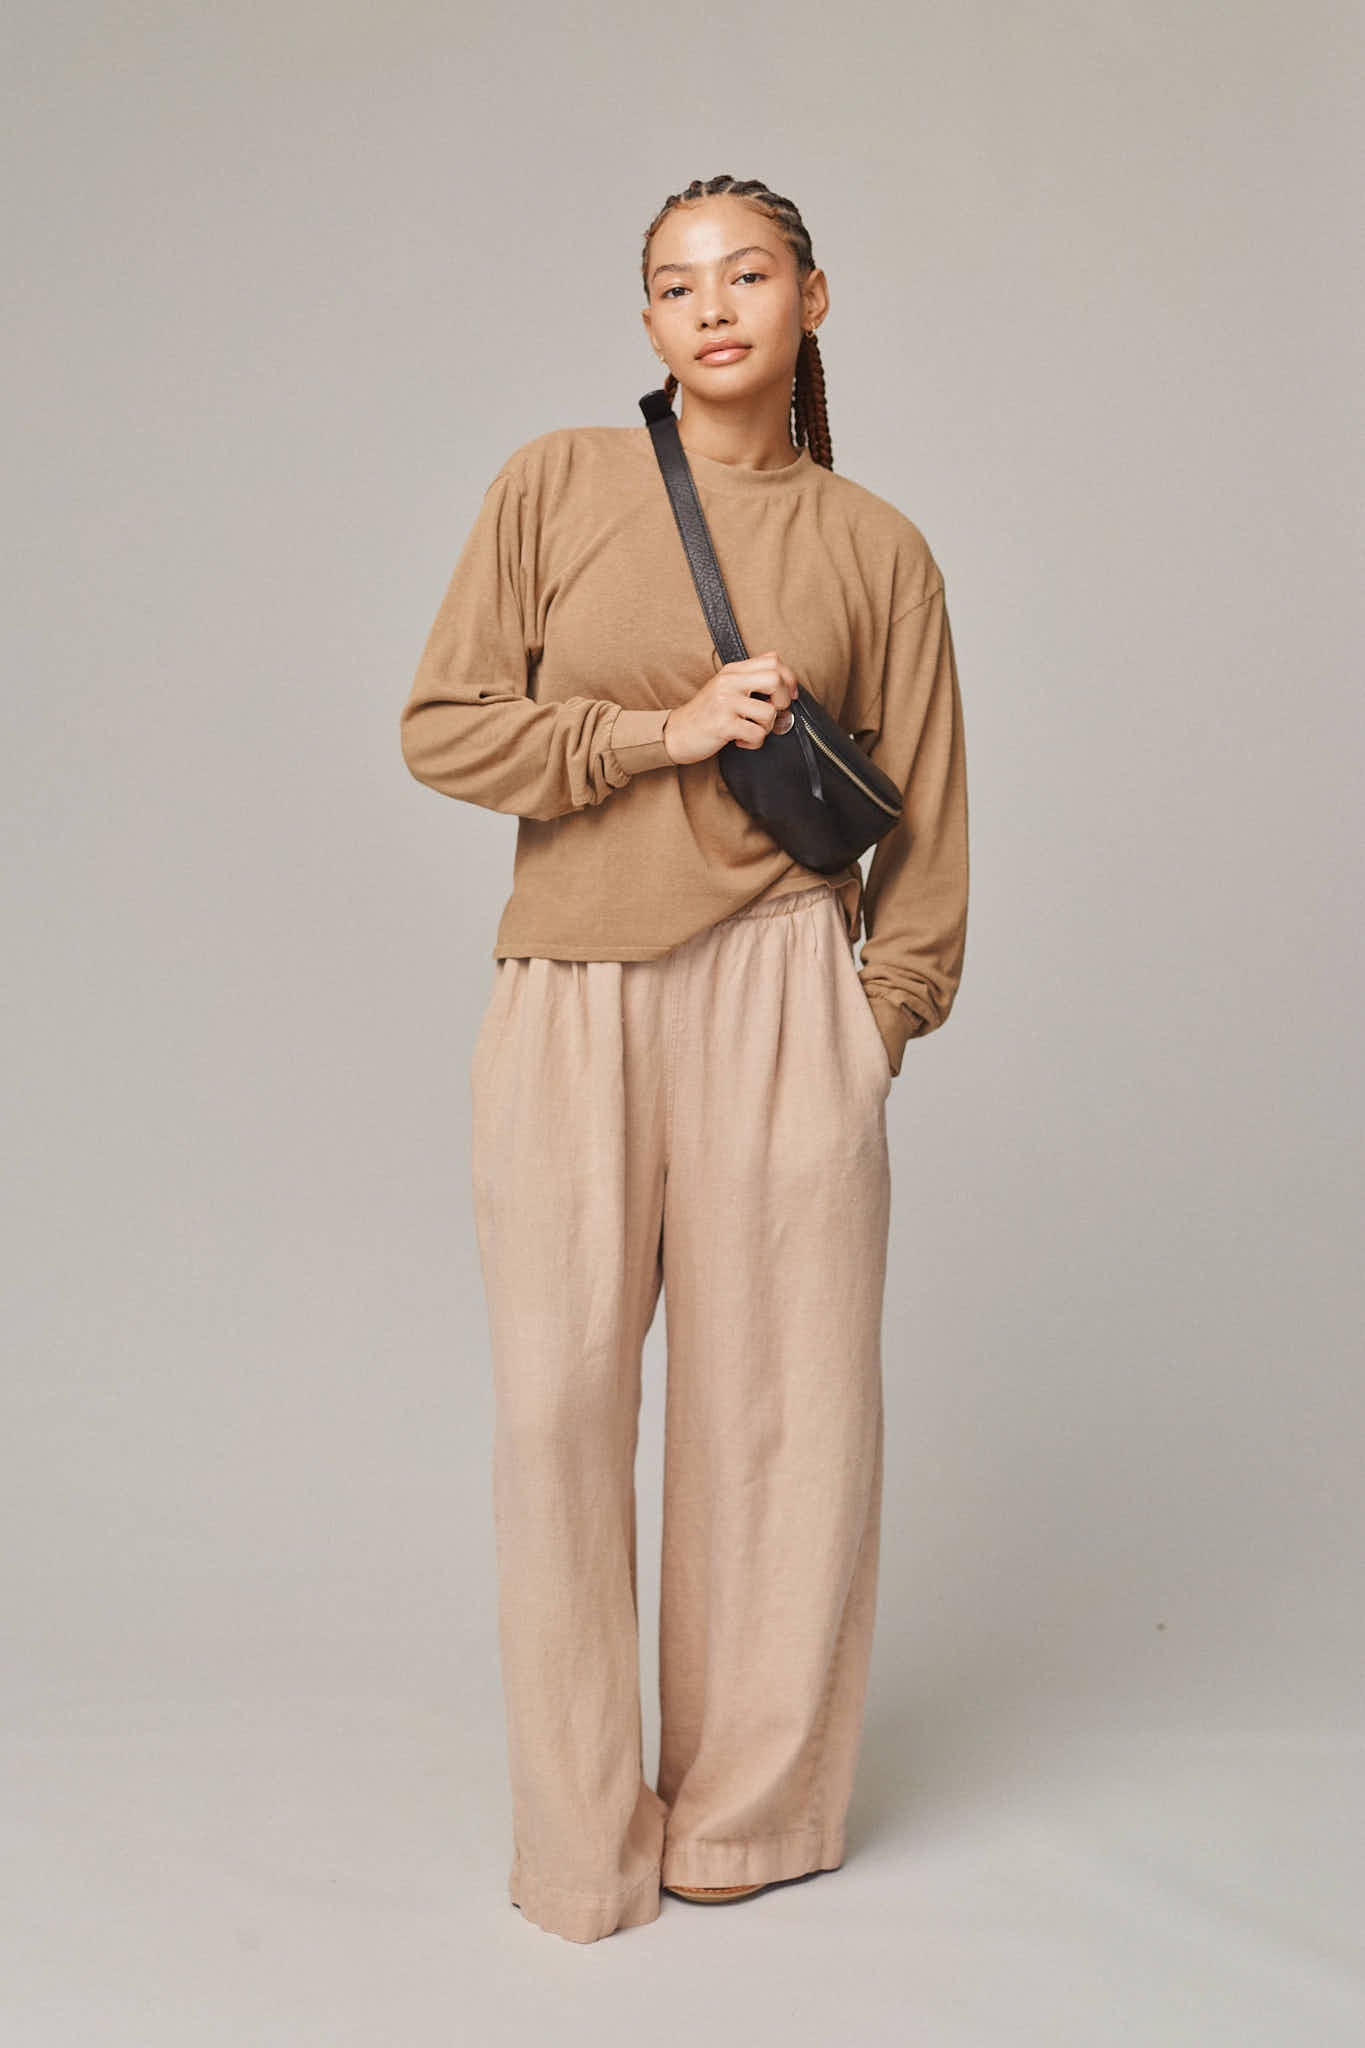 Camrbia pant. Effortlessly stylish with a flattering wide leg and mid-rise fit. The carefully woven 100% hemp results in a linen feel and elegant drape. A wardrobe staple, this versatile pant looks chic paired with everything from swimsuits to blazers. Sustainably made in Los Angeles.